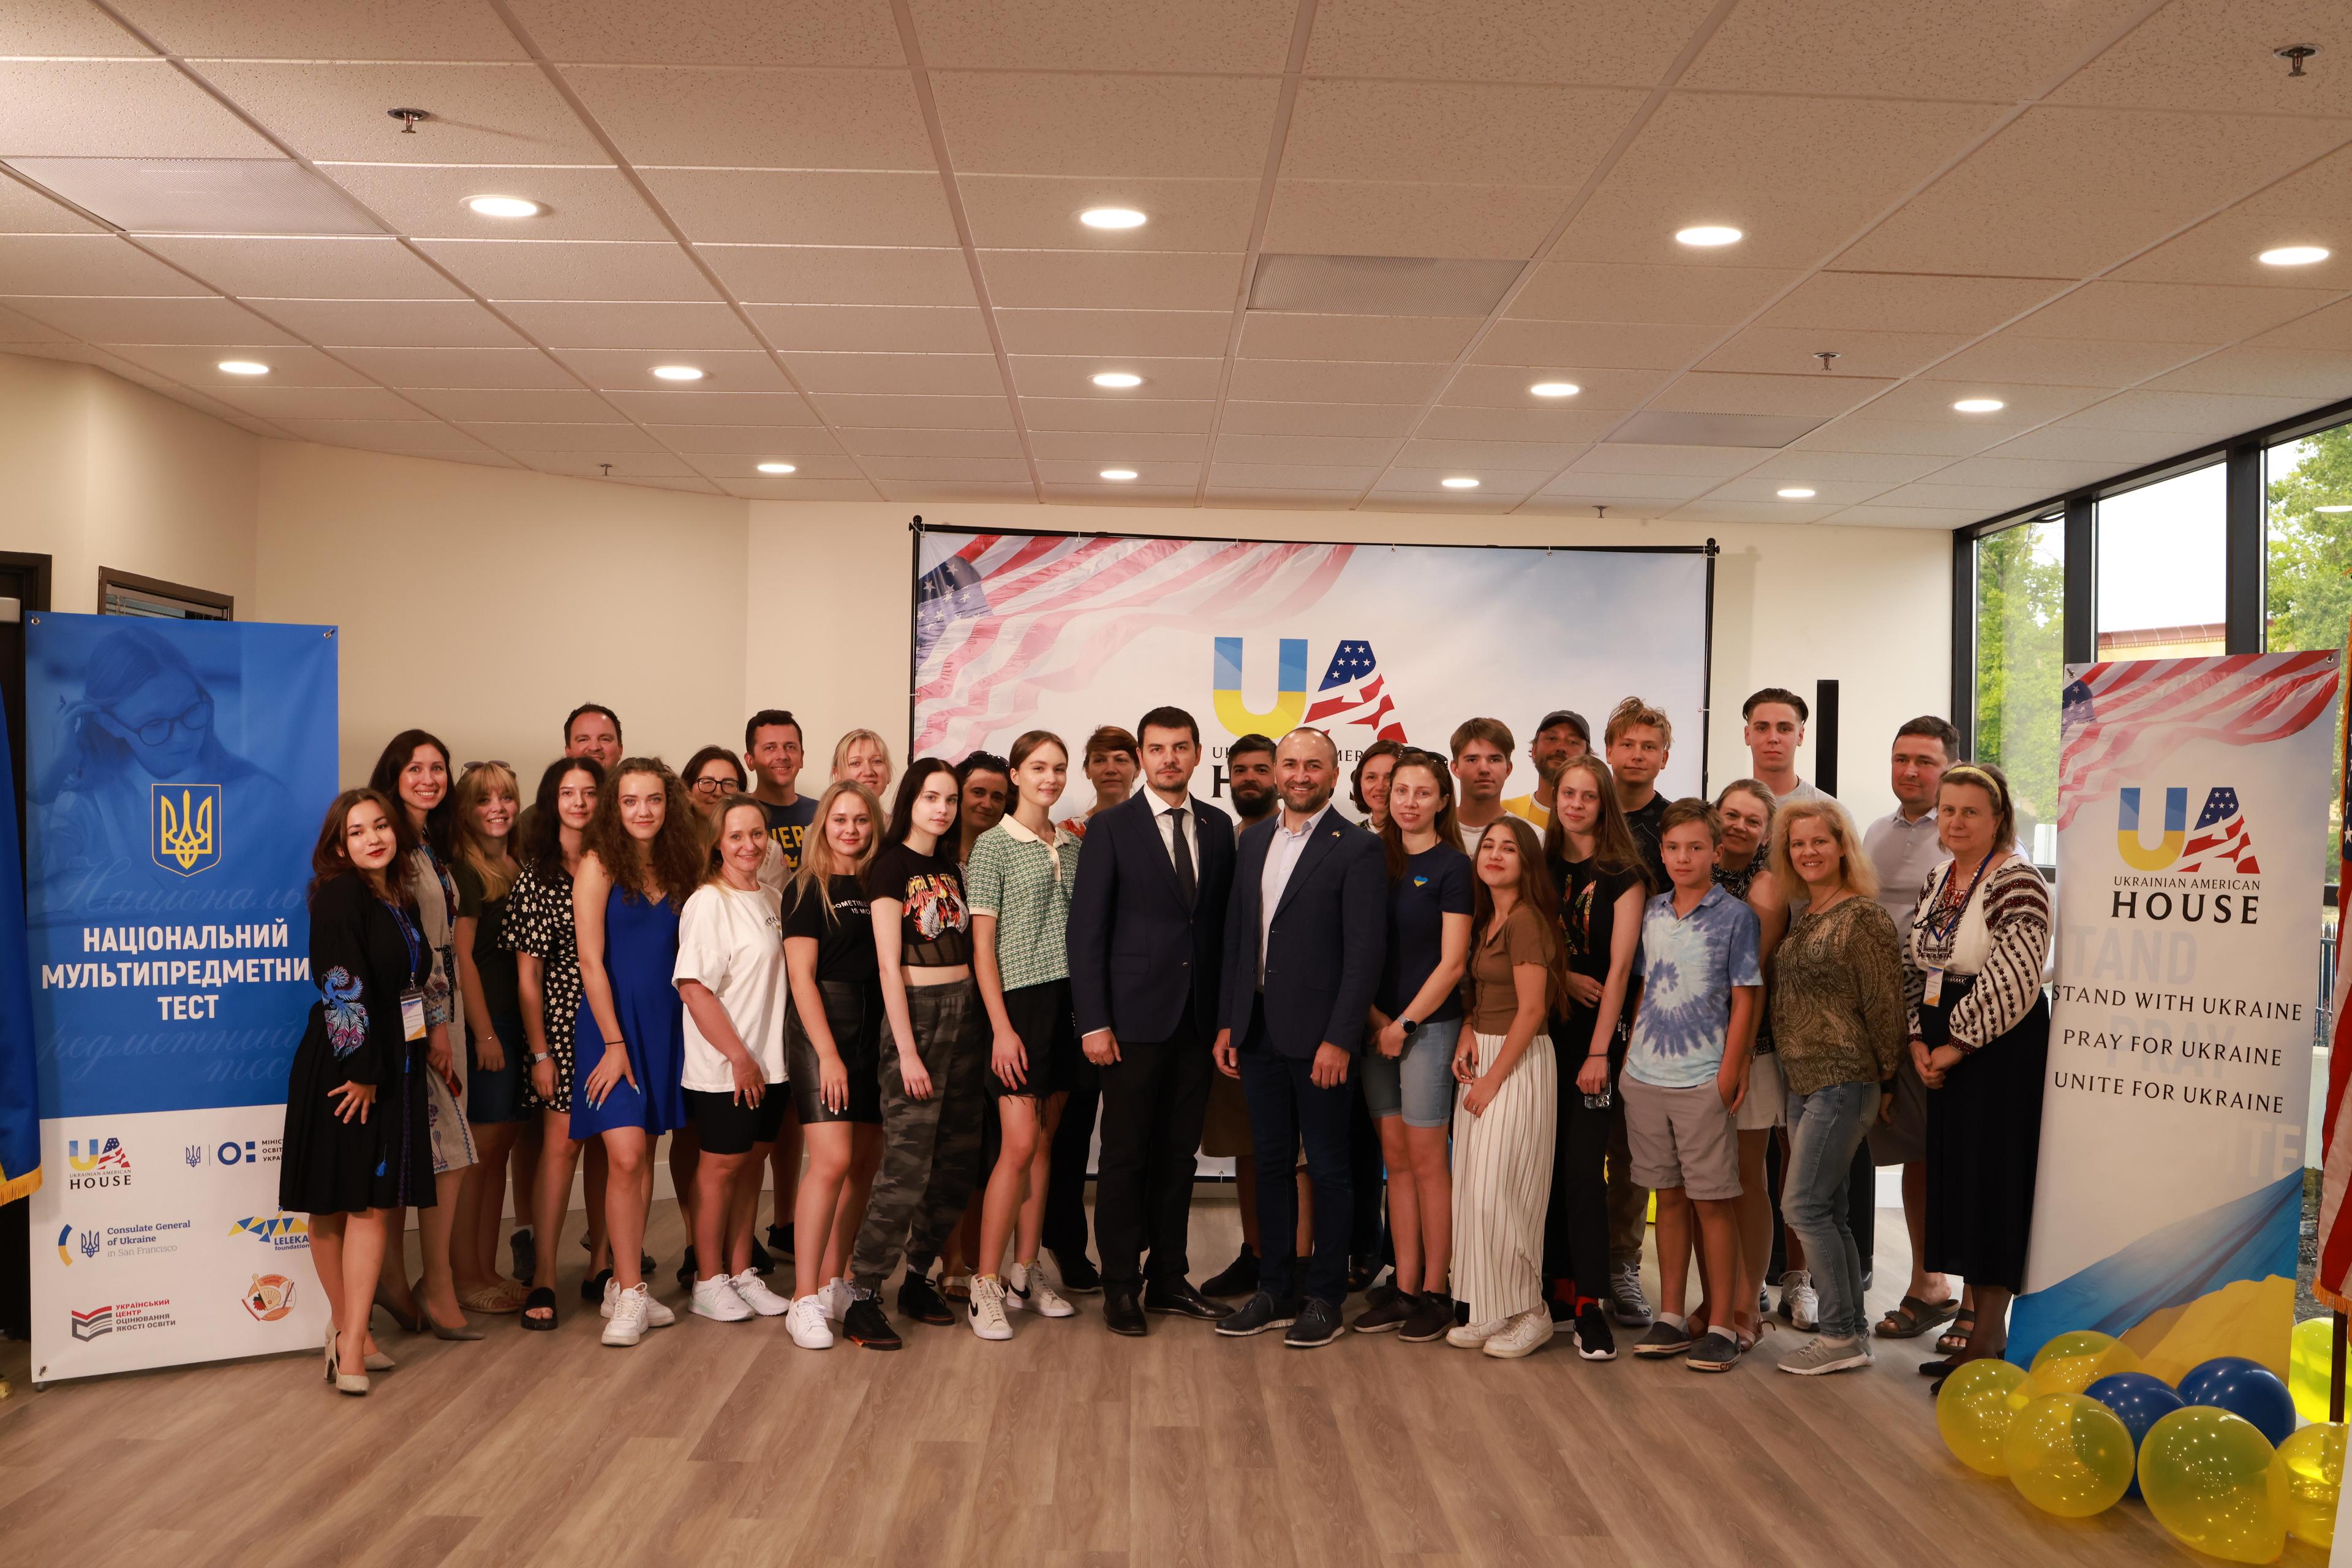 National Multi-subject Testing for Ukrainian graduates was held in the USA